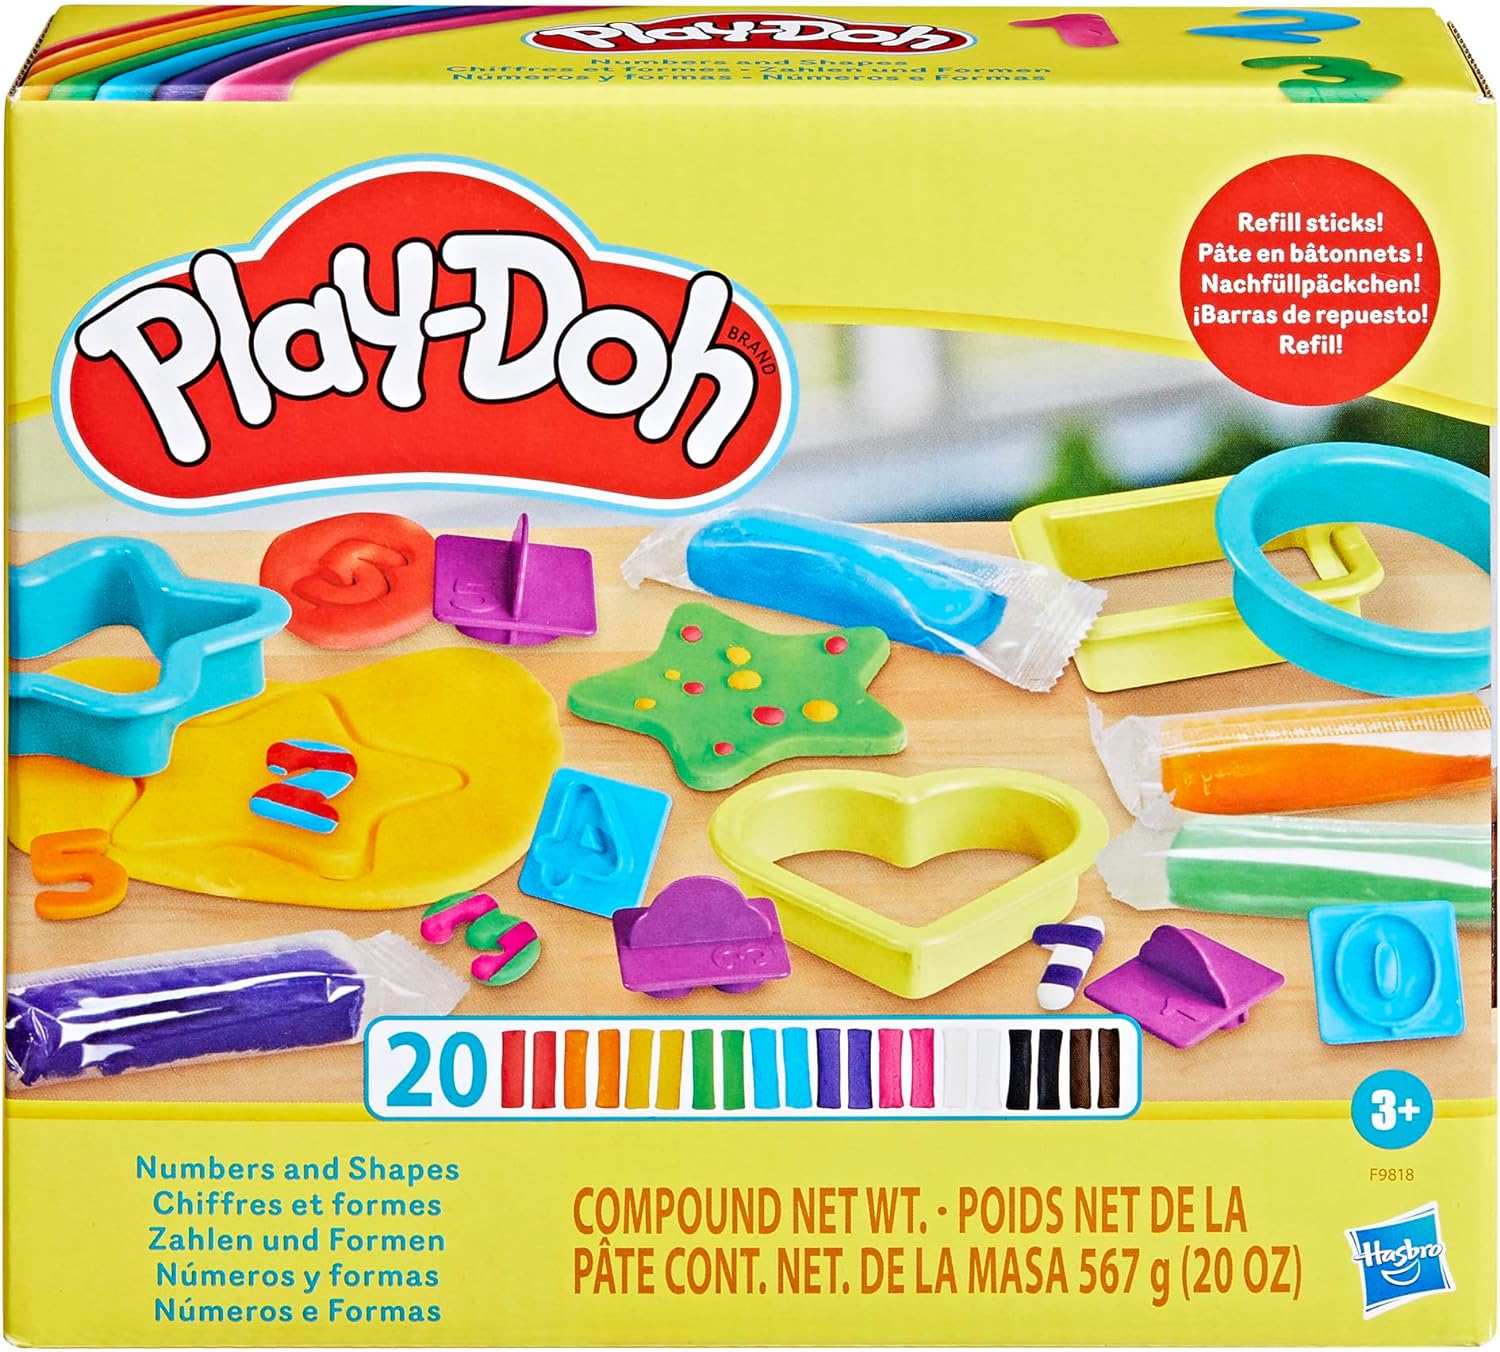 Playdough Tools for Kids, 41pcs Play Dough Toys Include Play Food Molds - Cupcakes, Ice Cream, Burger, Fries, Noodle, Playdough Bulk Pack with Rol